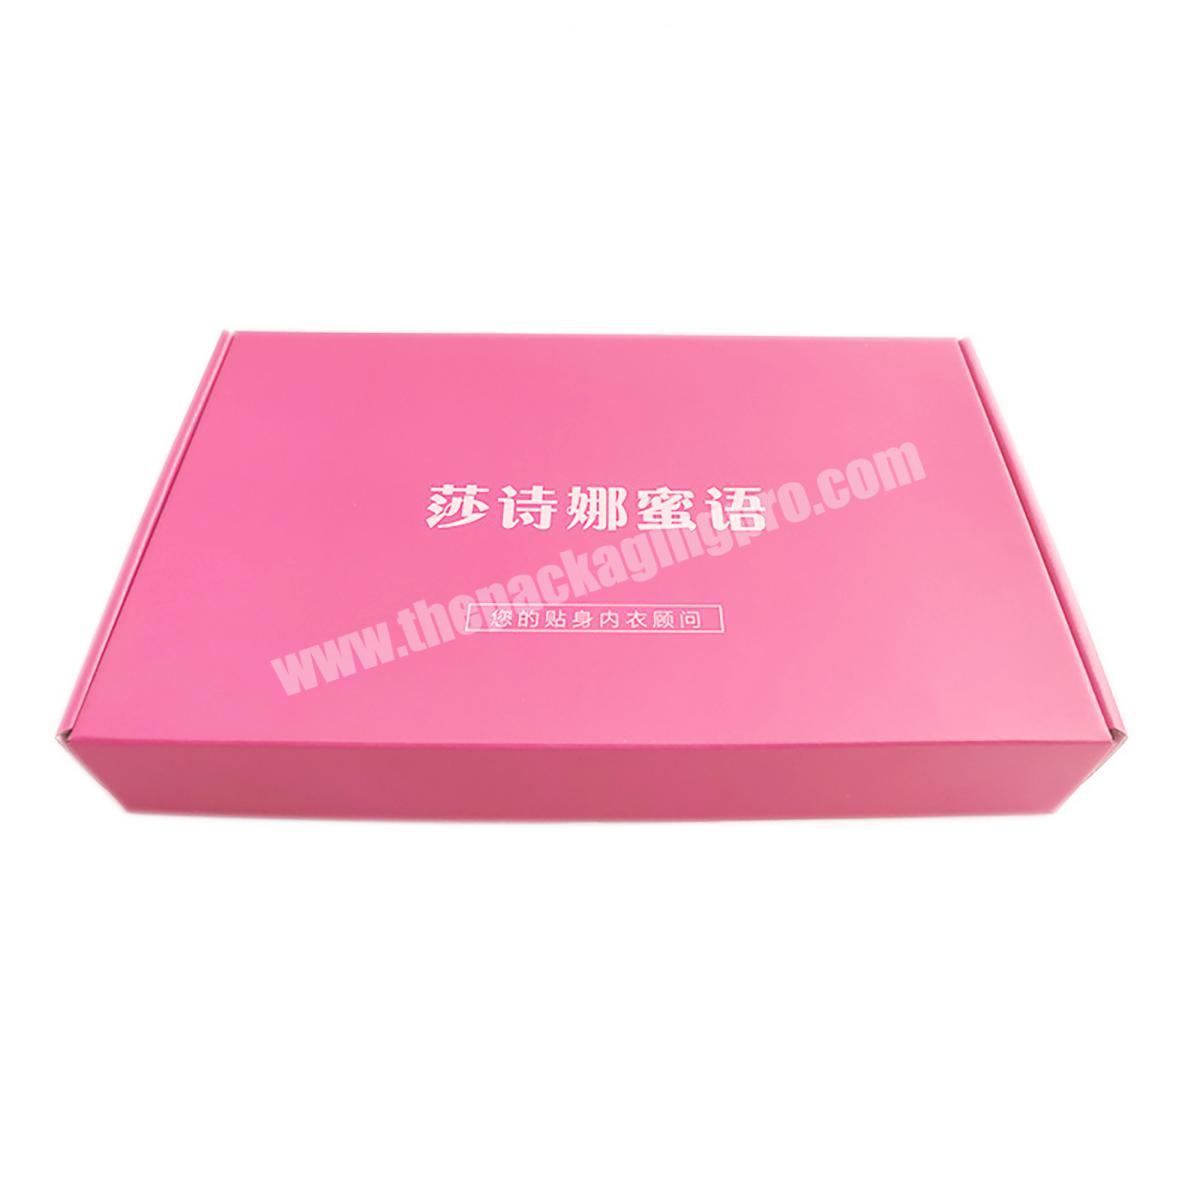 Mailer Box Manufacture Customized Colored Mailer With Custom Logo ...